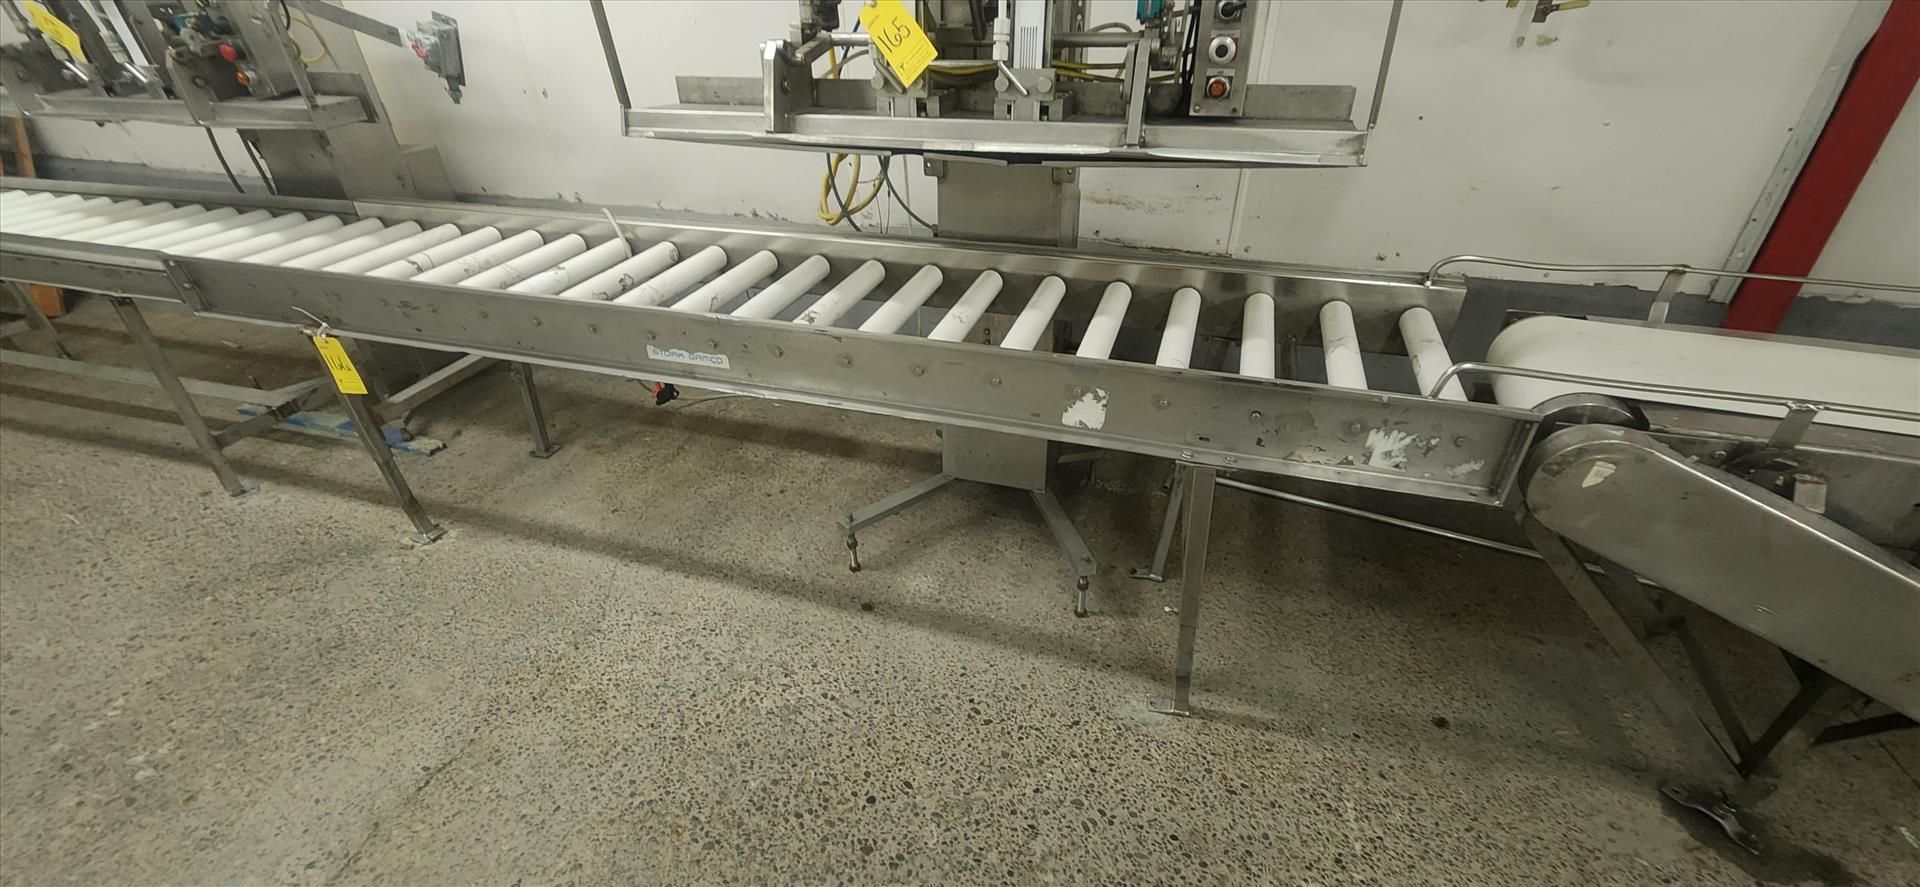 conveyor, roller, stainless steel frame, approx. 19 in. x 10 ft. [Loc. Whole Bird]